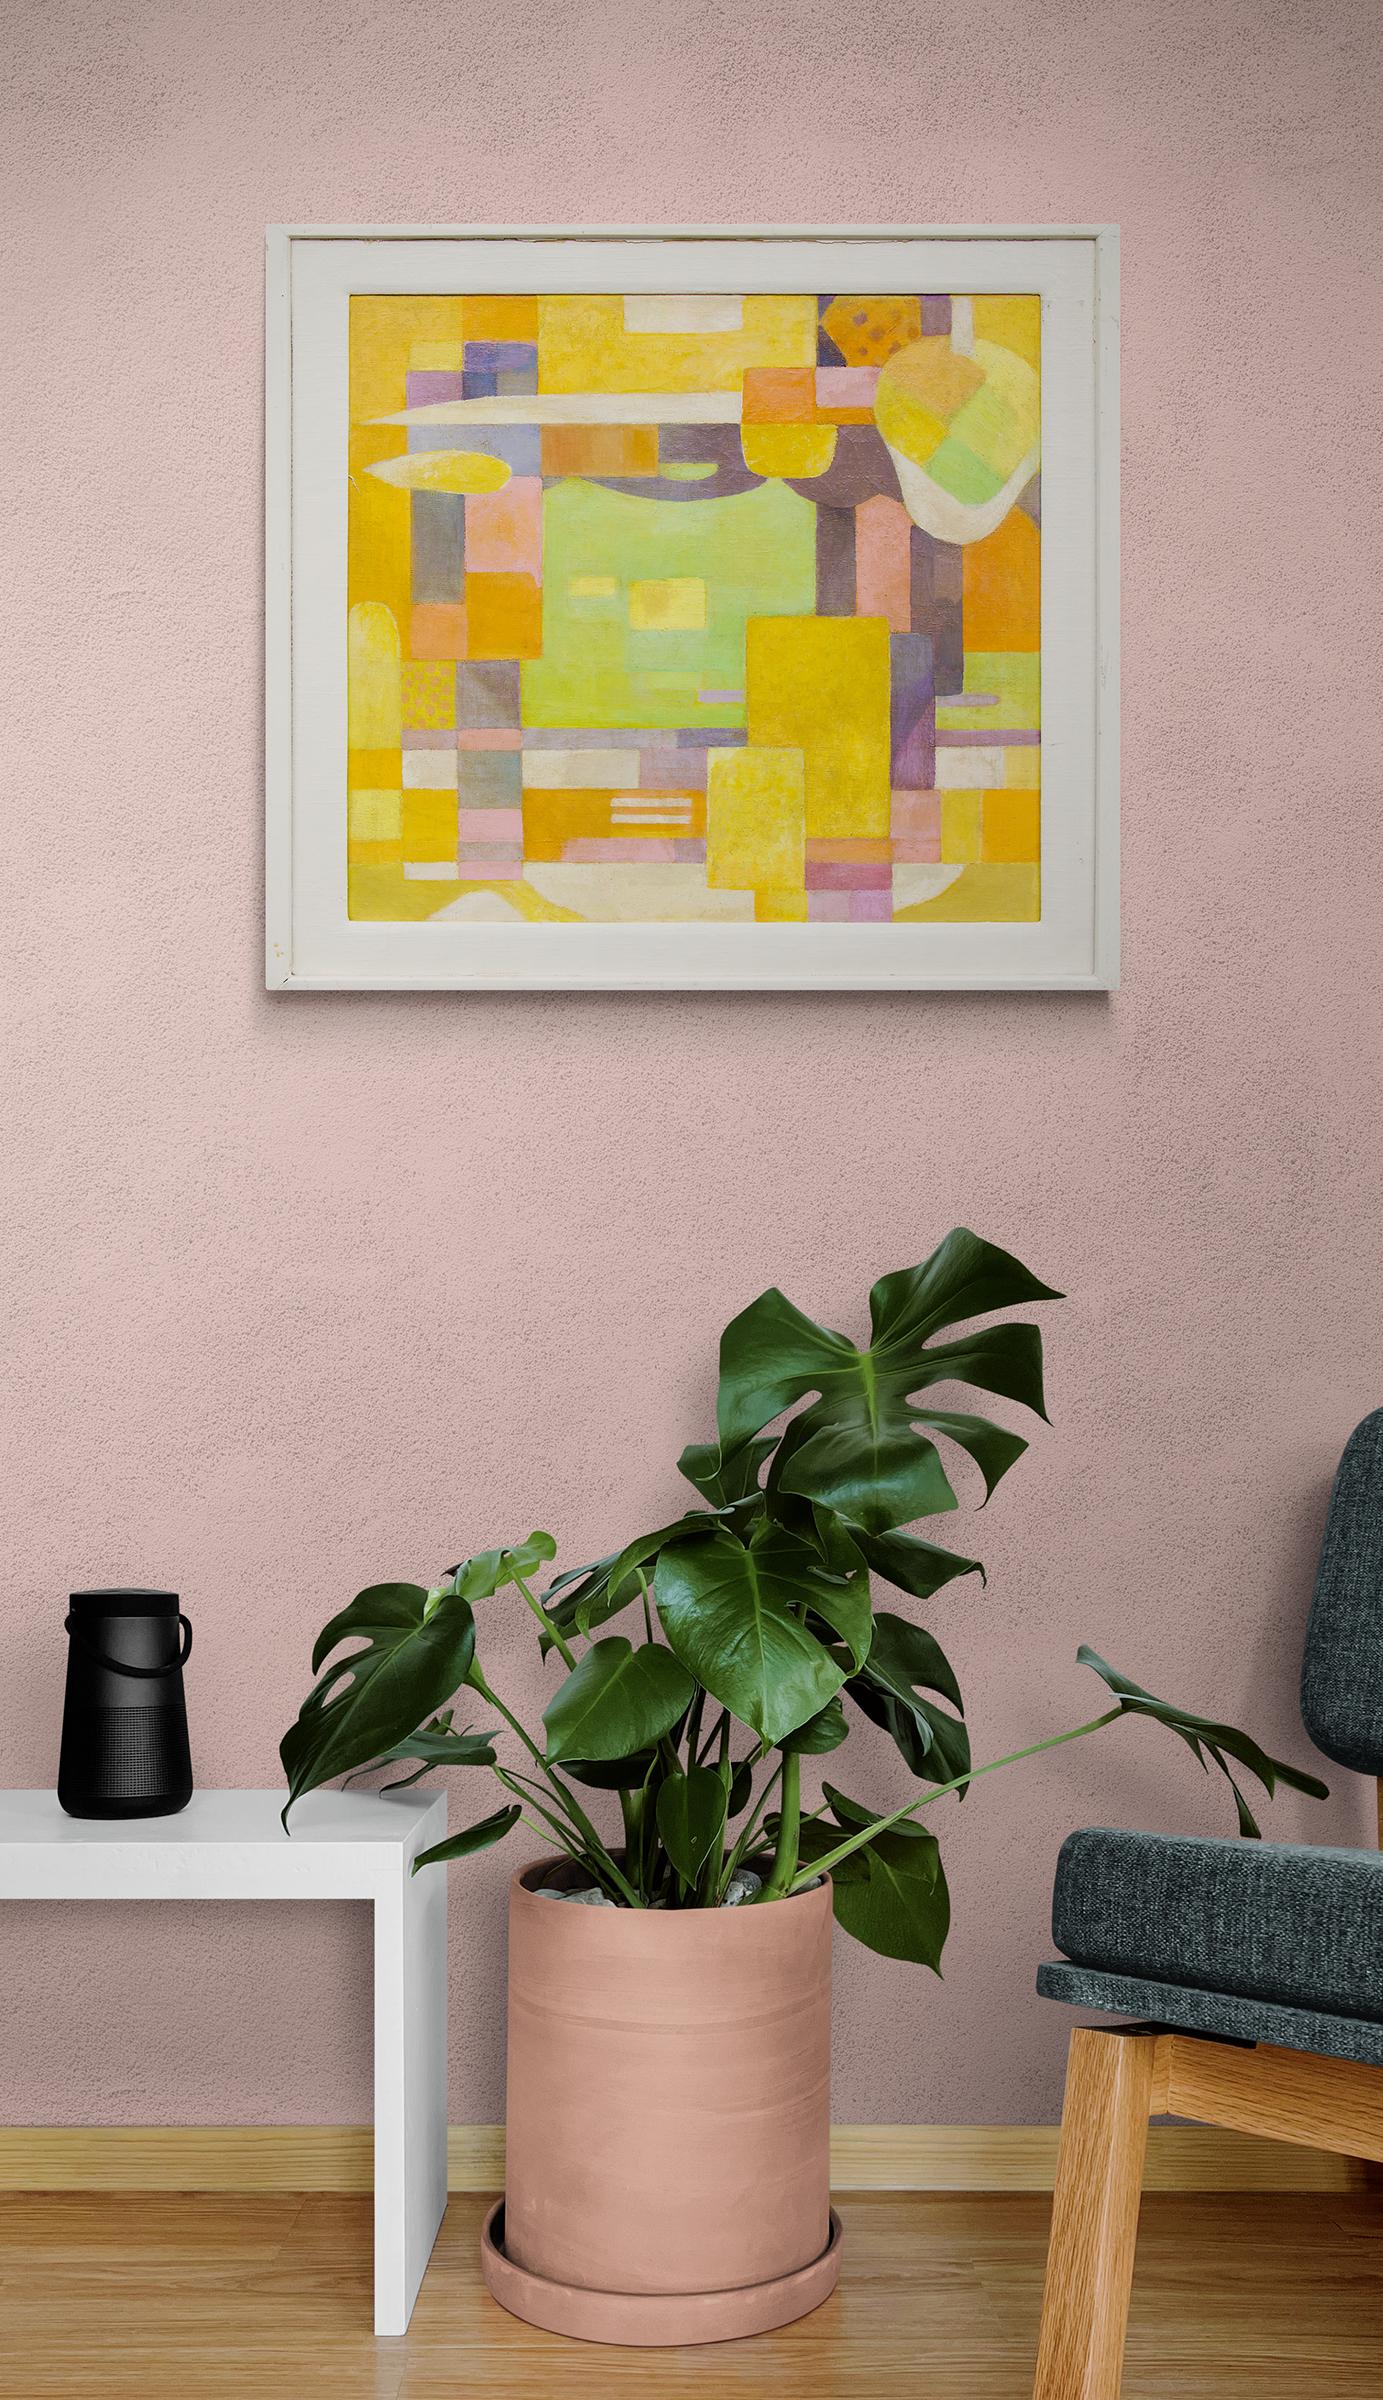 Harbor, Framed Mid Century Abstract Oil Painting, Pink Orange Yellow Green For Sale 1